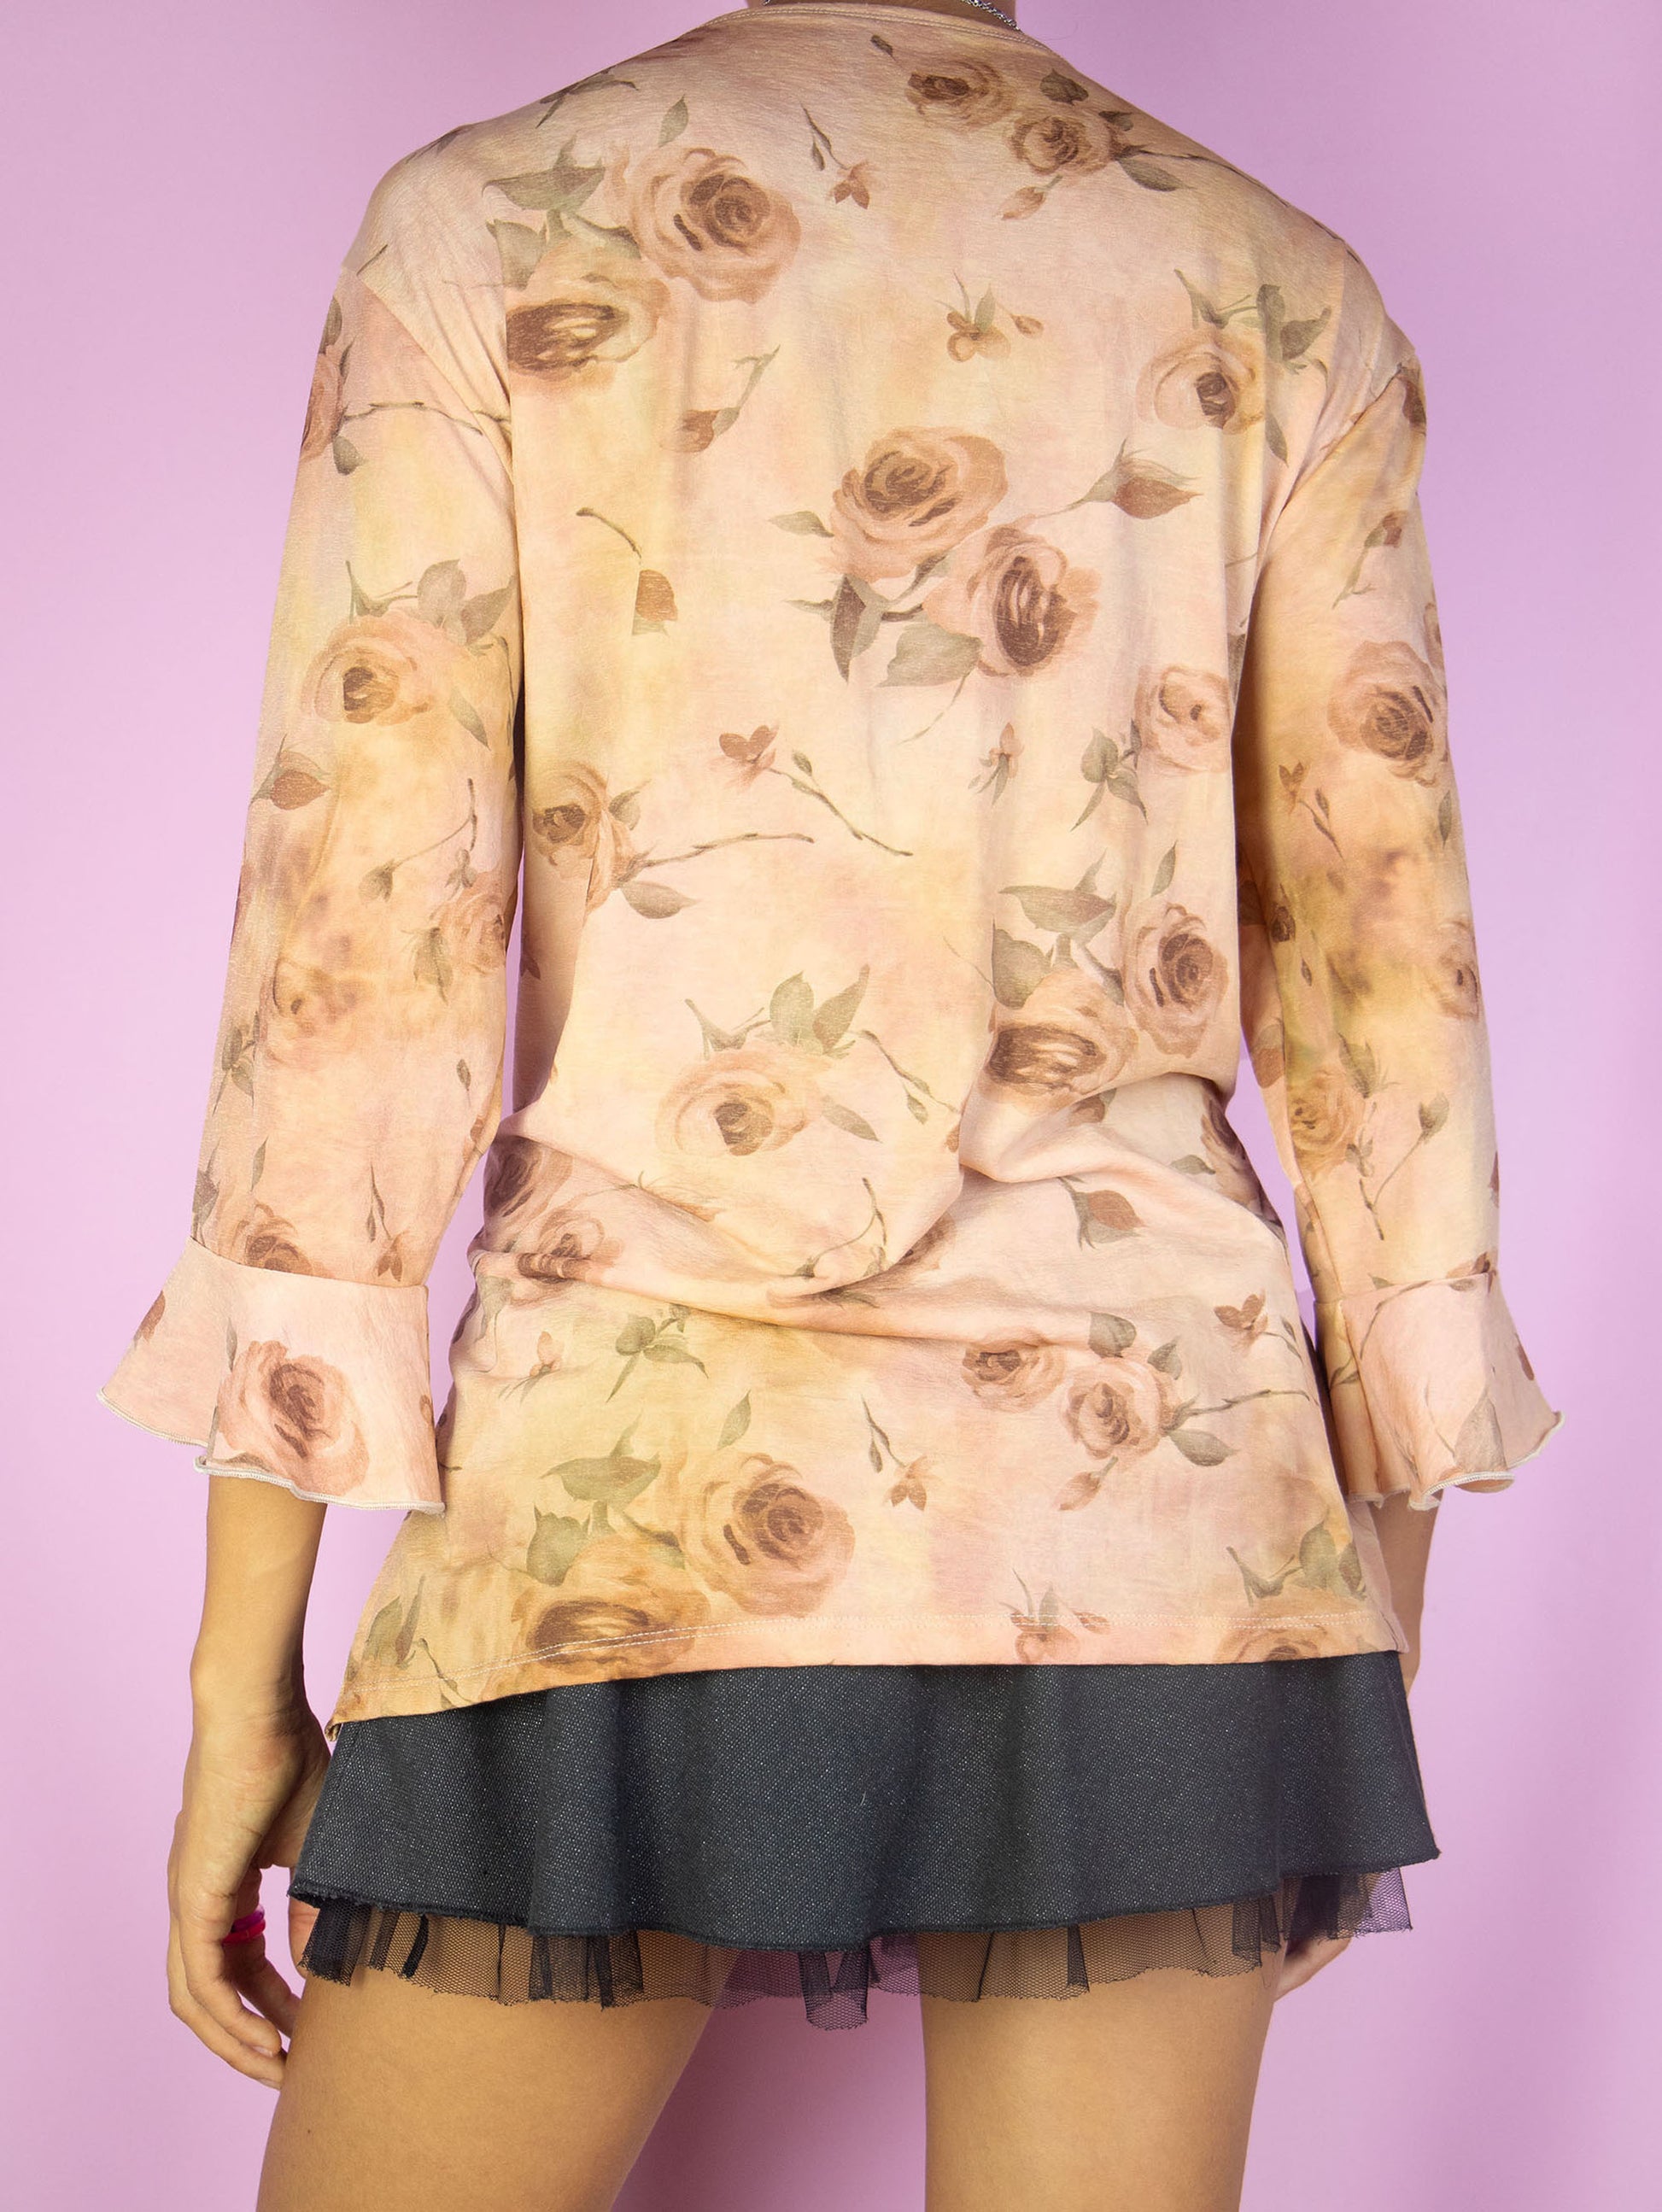 The Y2K Romantic Ruffle Top is a vintage pink rose gold three-quarter bell sleeve floral printed blouse with a ruffled collar. Boho fairy grunge 2000s summer top. Made in Spain.